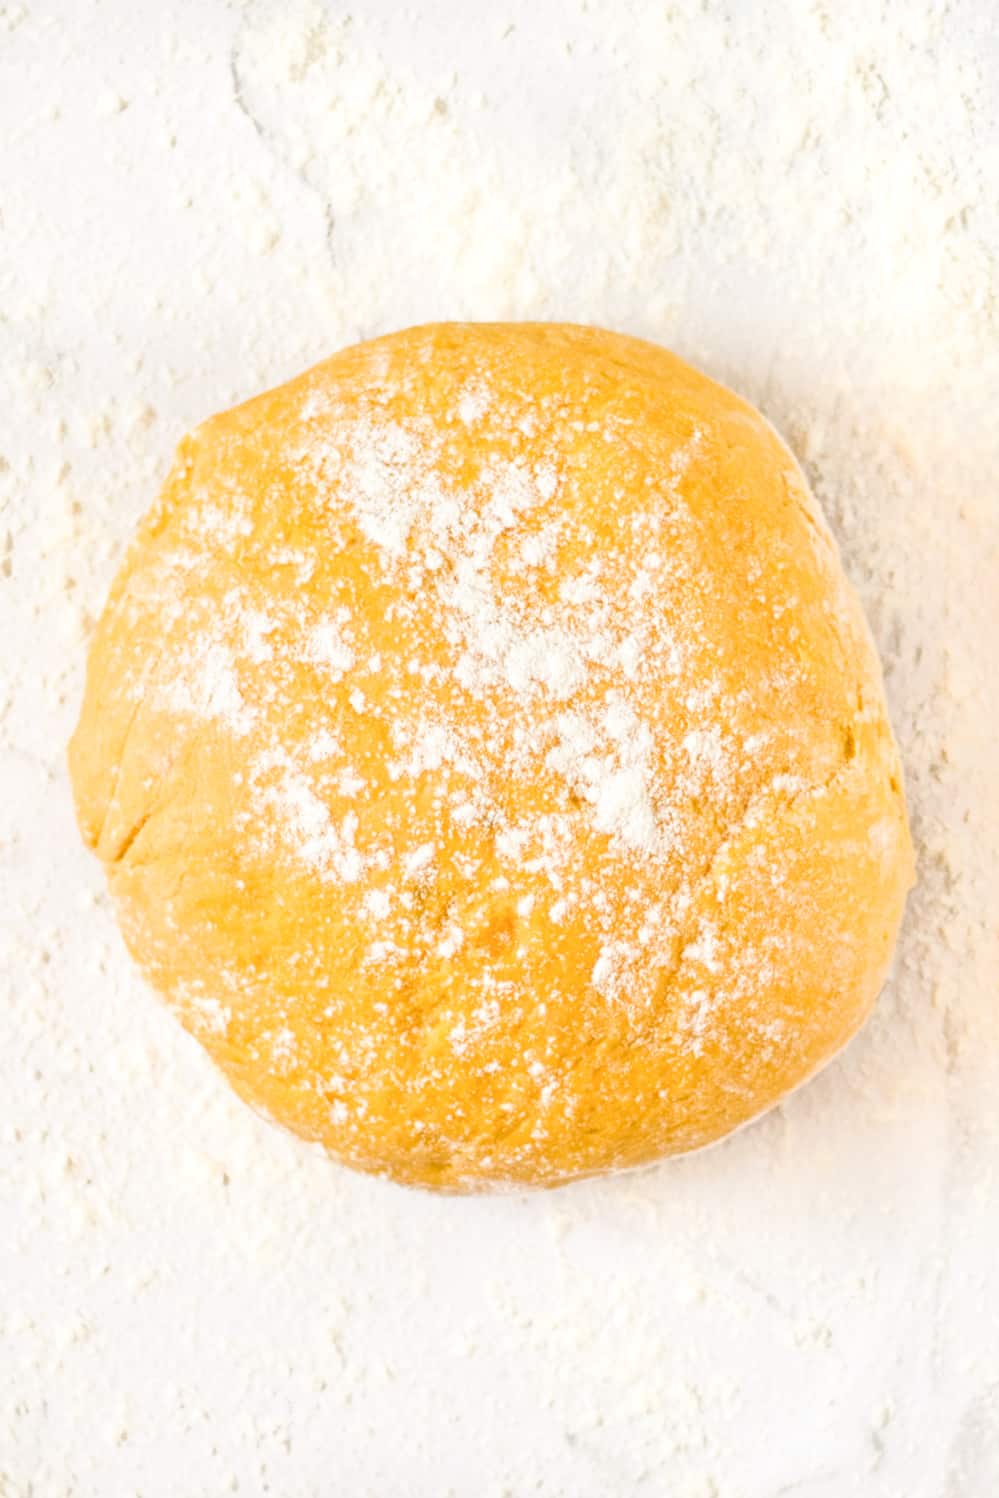 Sweet potato gnocchi dough sprinkled with flour on a smooth surface.